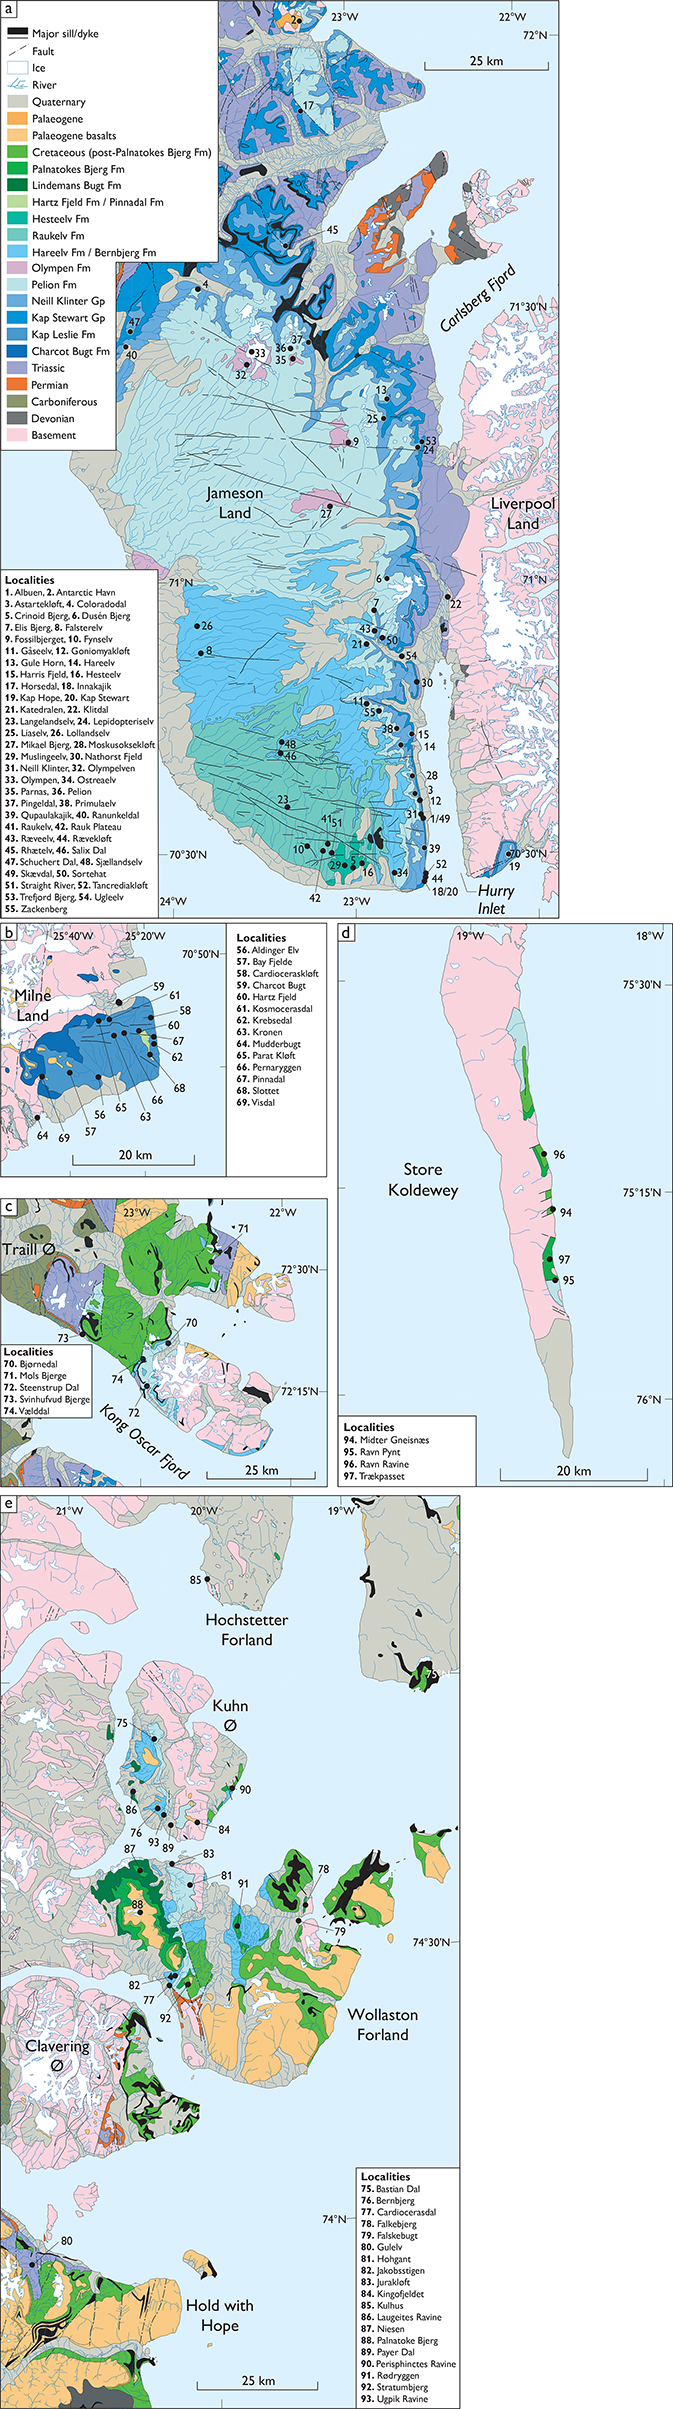 Fig. 2 Maps showing the position of place names and localities mentioned in the text. Based on the digital Greenland geological map at a scale of 1:500 000 (Kokfelt et al. 2013). (a): Geological and locality map of Jameson Land. The outcrop area indicated as the Pelion Formation on this map also includes the Fossilbjerget Formation. (b) : Geological and locality map of south-east Milne Land. (c): Geological and locality map of eastern Traill Ø. The outcrop area indicated as the Pelion Formation on this map also includes the Bristol Elv, Fossilbjerget and Olympen Formations. (d): Geological and locality map of Store Koldewey. The outcrop area indicated as Pelion Formation on this map also includes the Bastians Dal, Muslingebjerg, Payer Dal and Bernbjerg Formations. (e): Geological and locality map of the Hold with Hope, Clavering Ø, Wollaston Forland, Kuhn Ø and Hochstetter Forland area. The outcrop area indicated as the Pelion Formation on this map also includes the Bastians Dal, Muslingebjerg, Payer Dal and Jakobsstigen Formations.